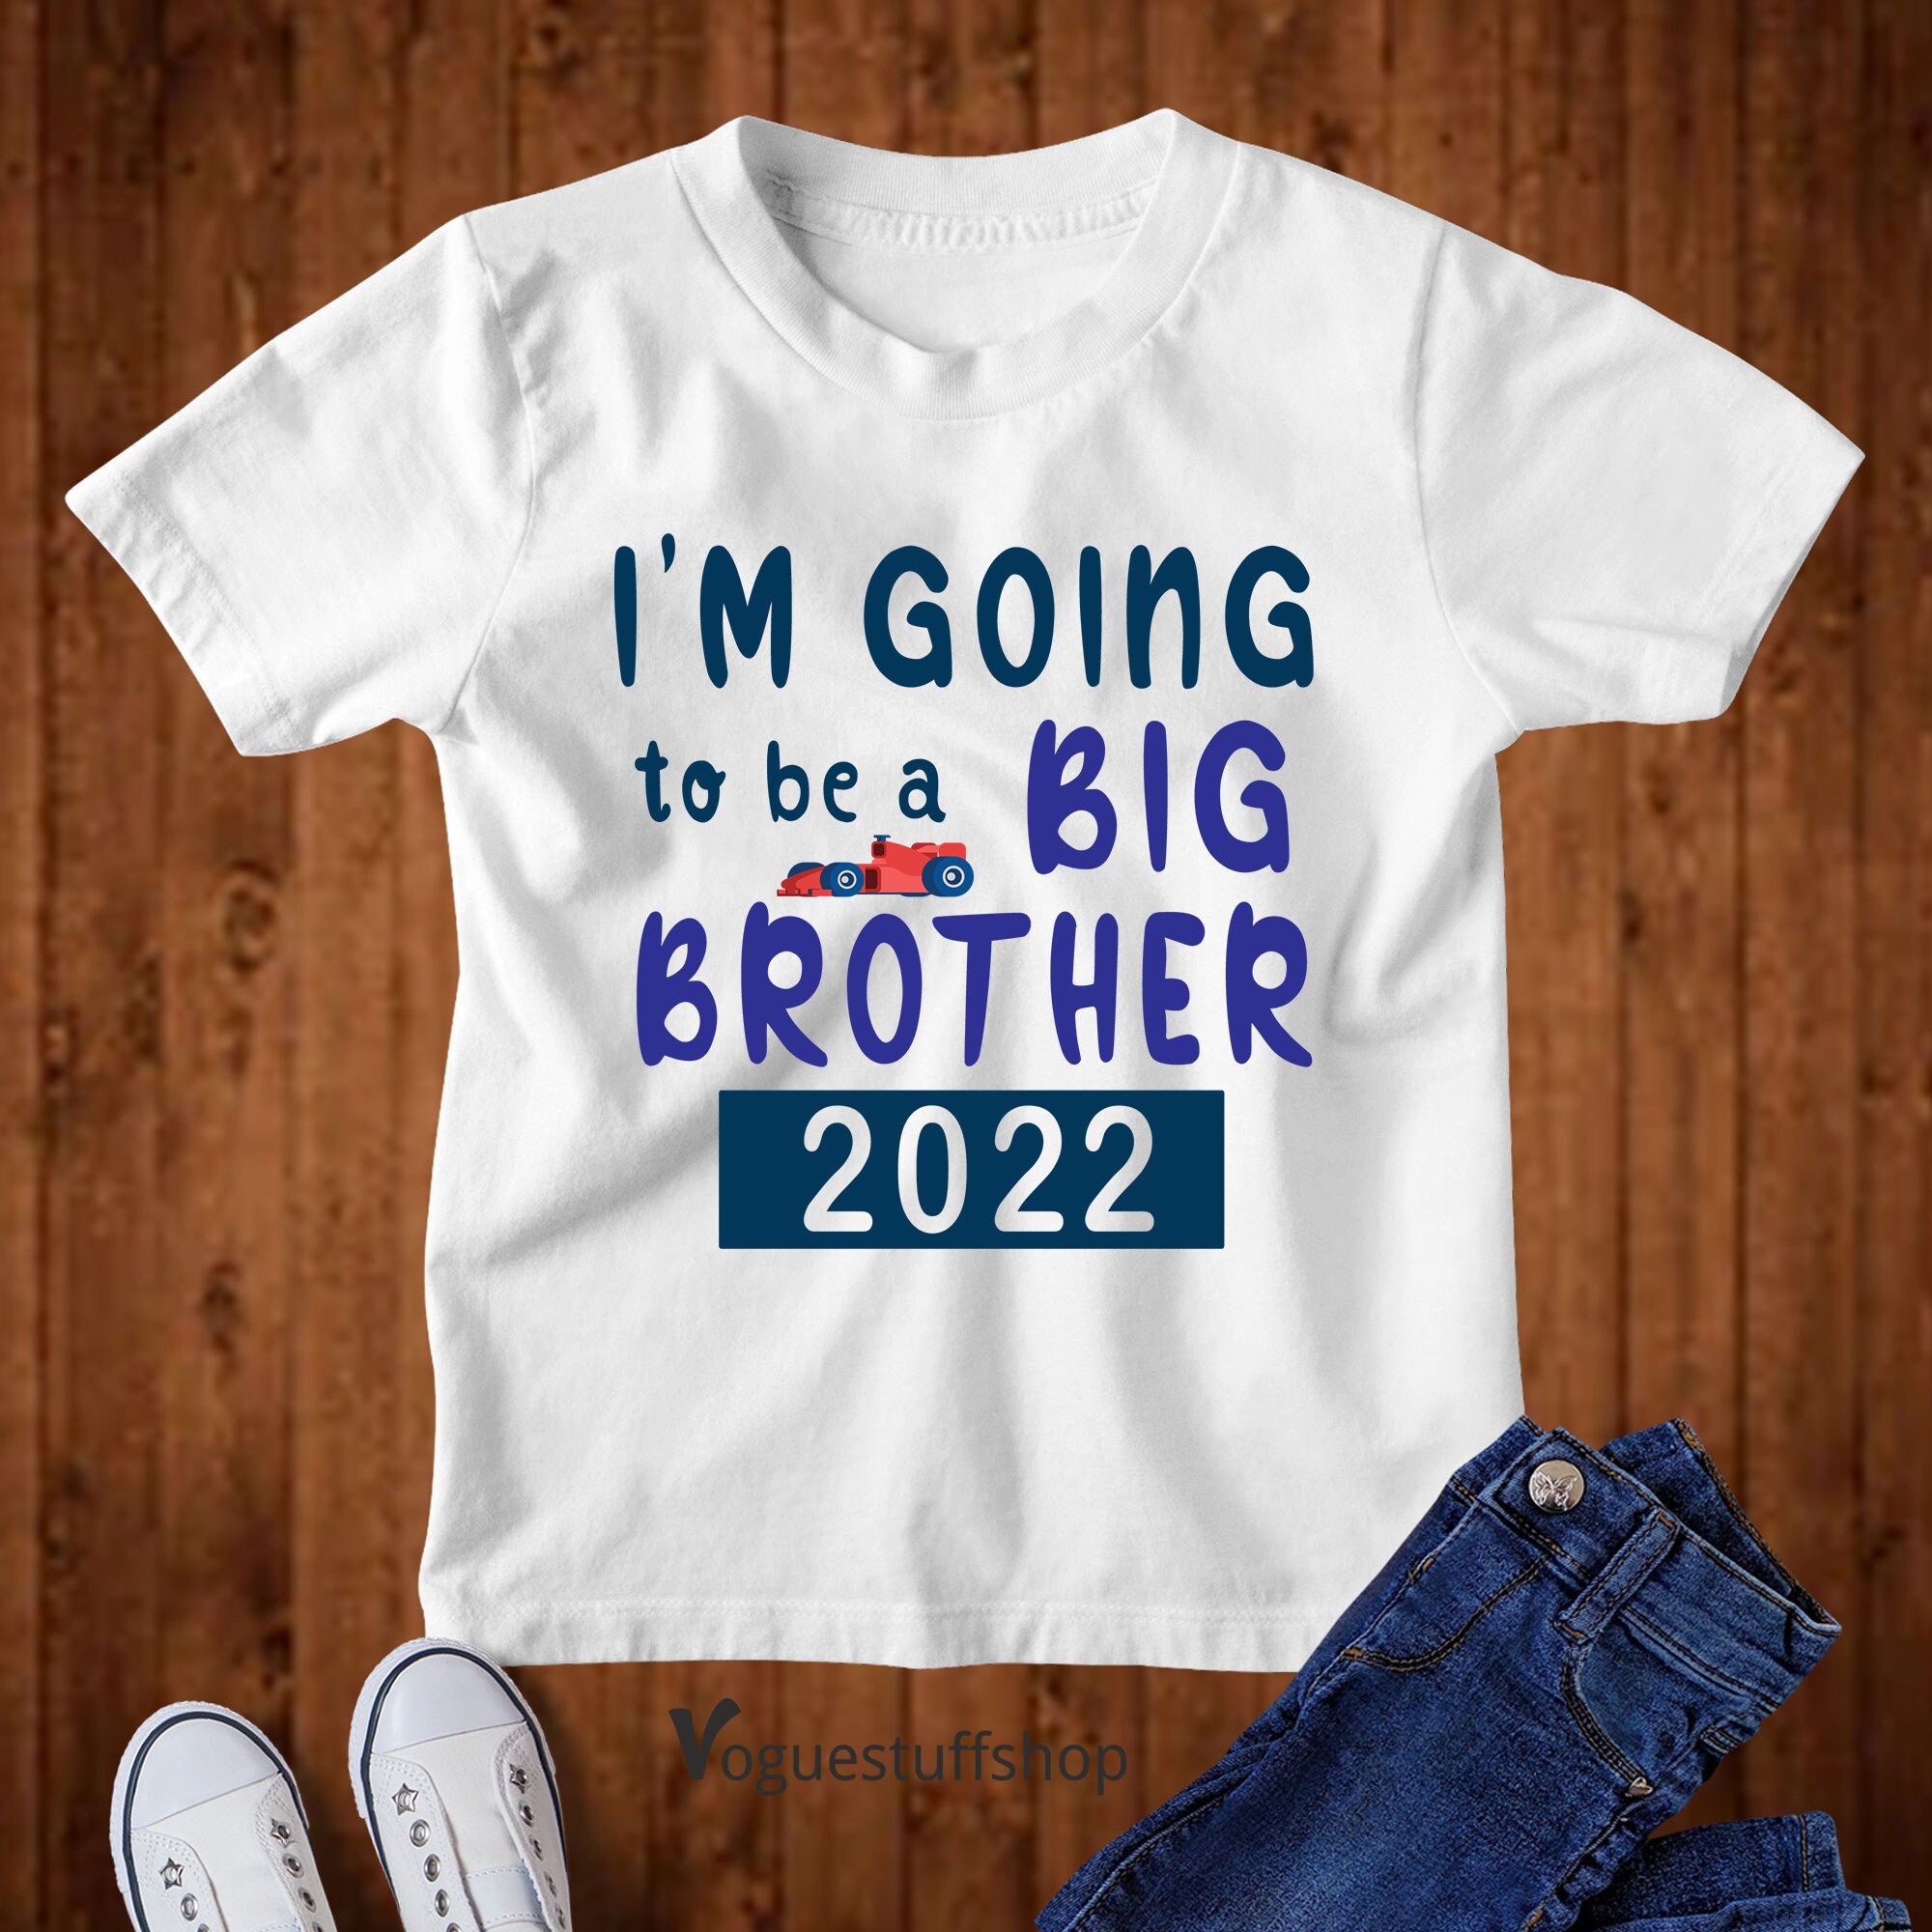 I'm going to be a  big brother childrens dinosaur T Shirt/bodysuit 